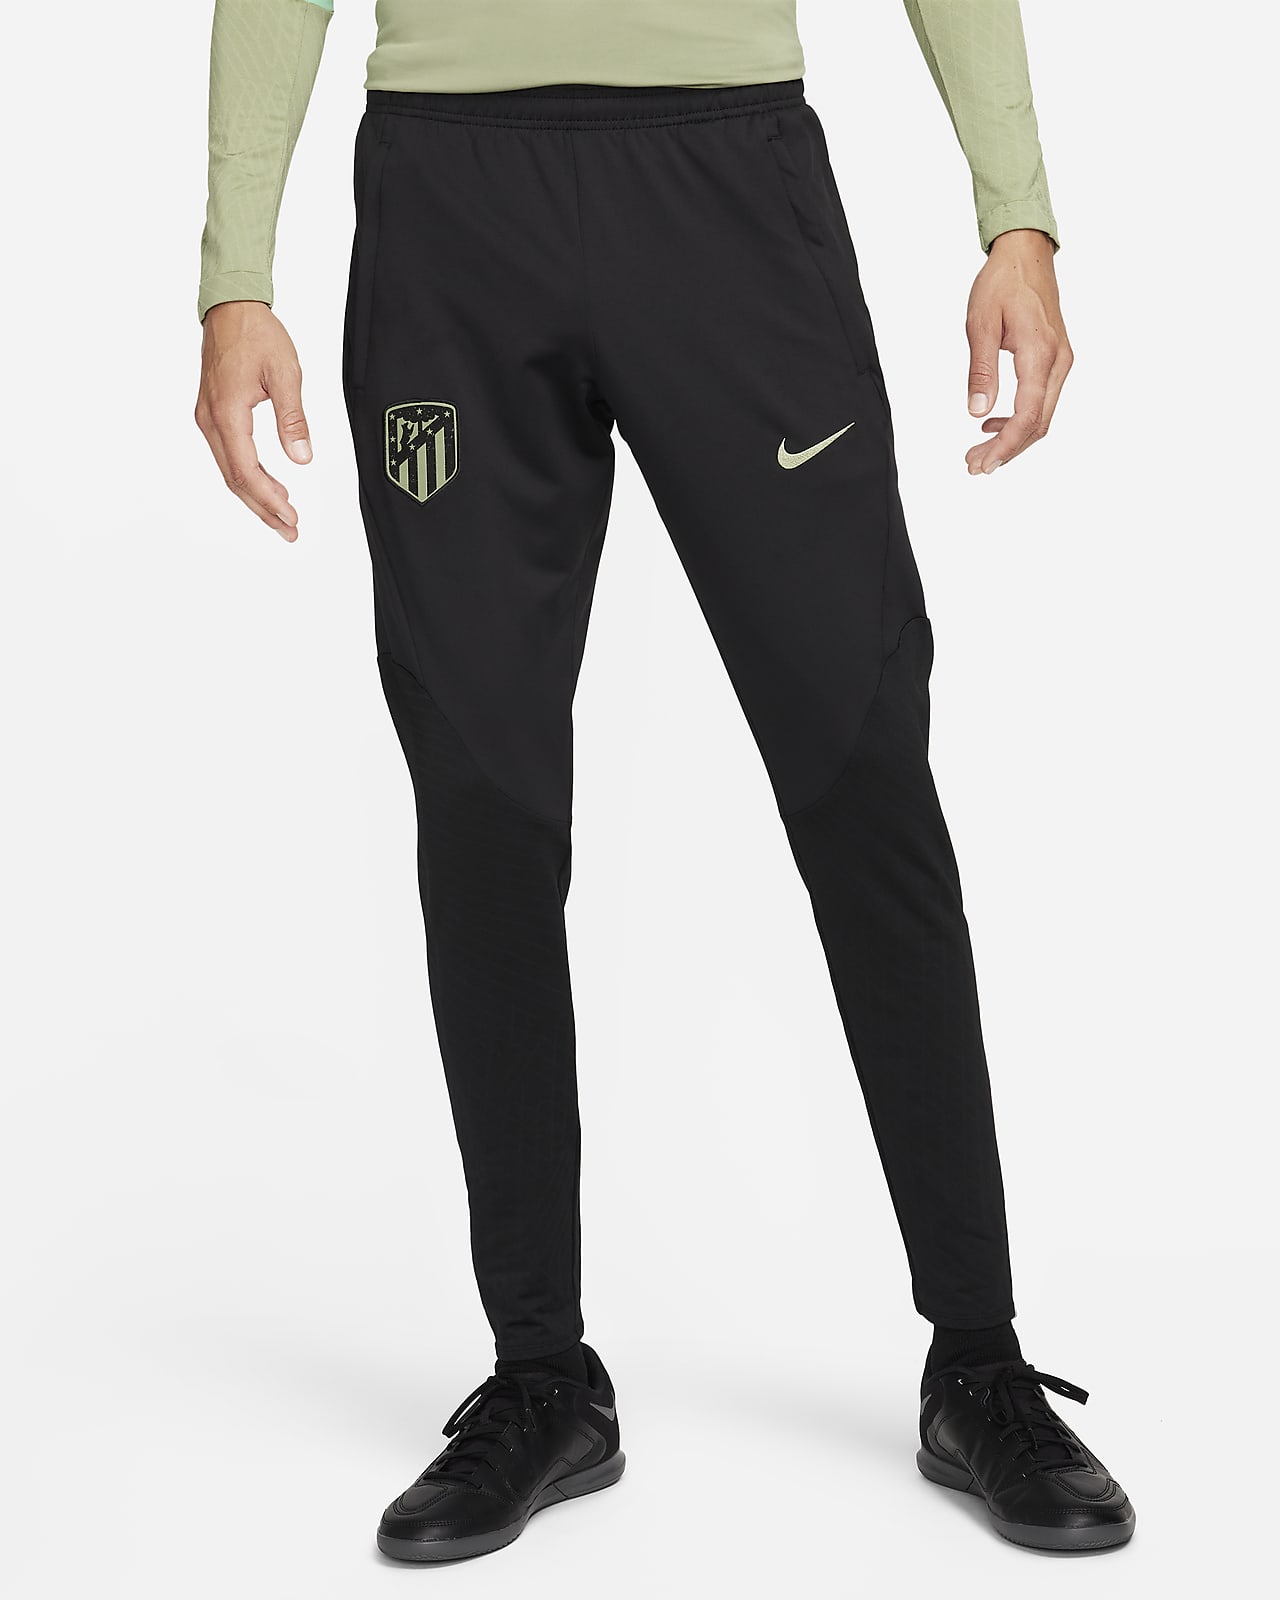 Nike Strike Knit Pant with Pockets and Zippers